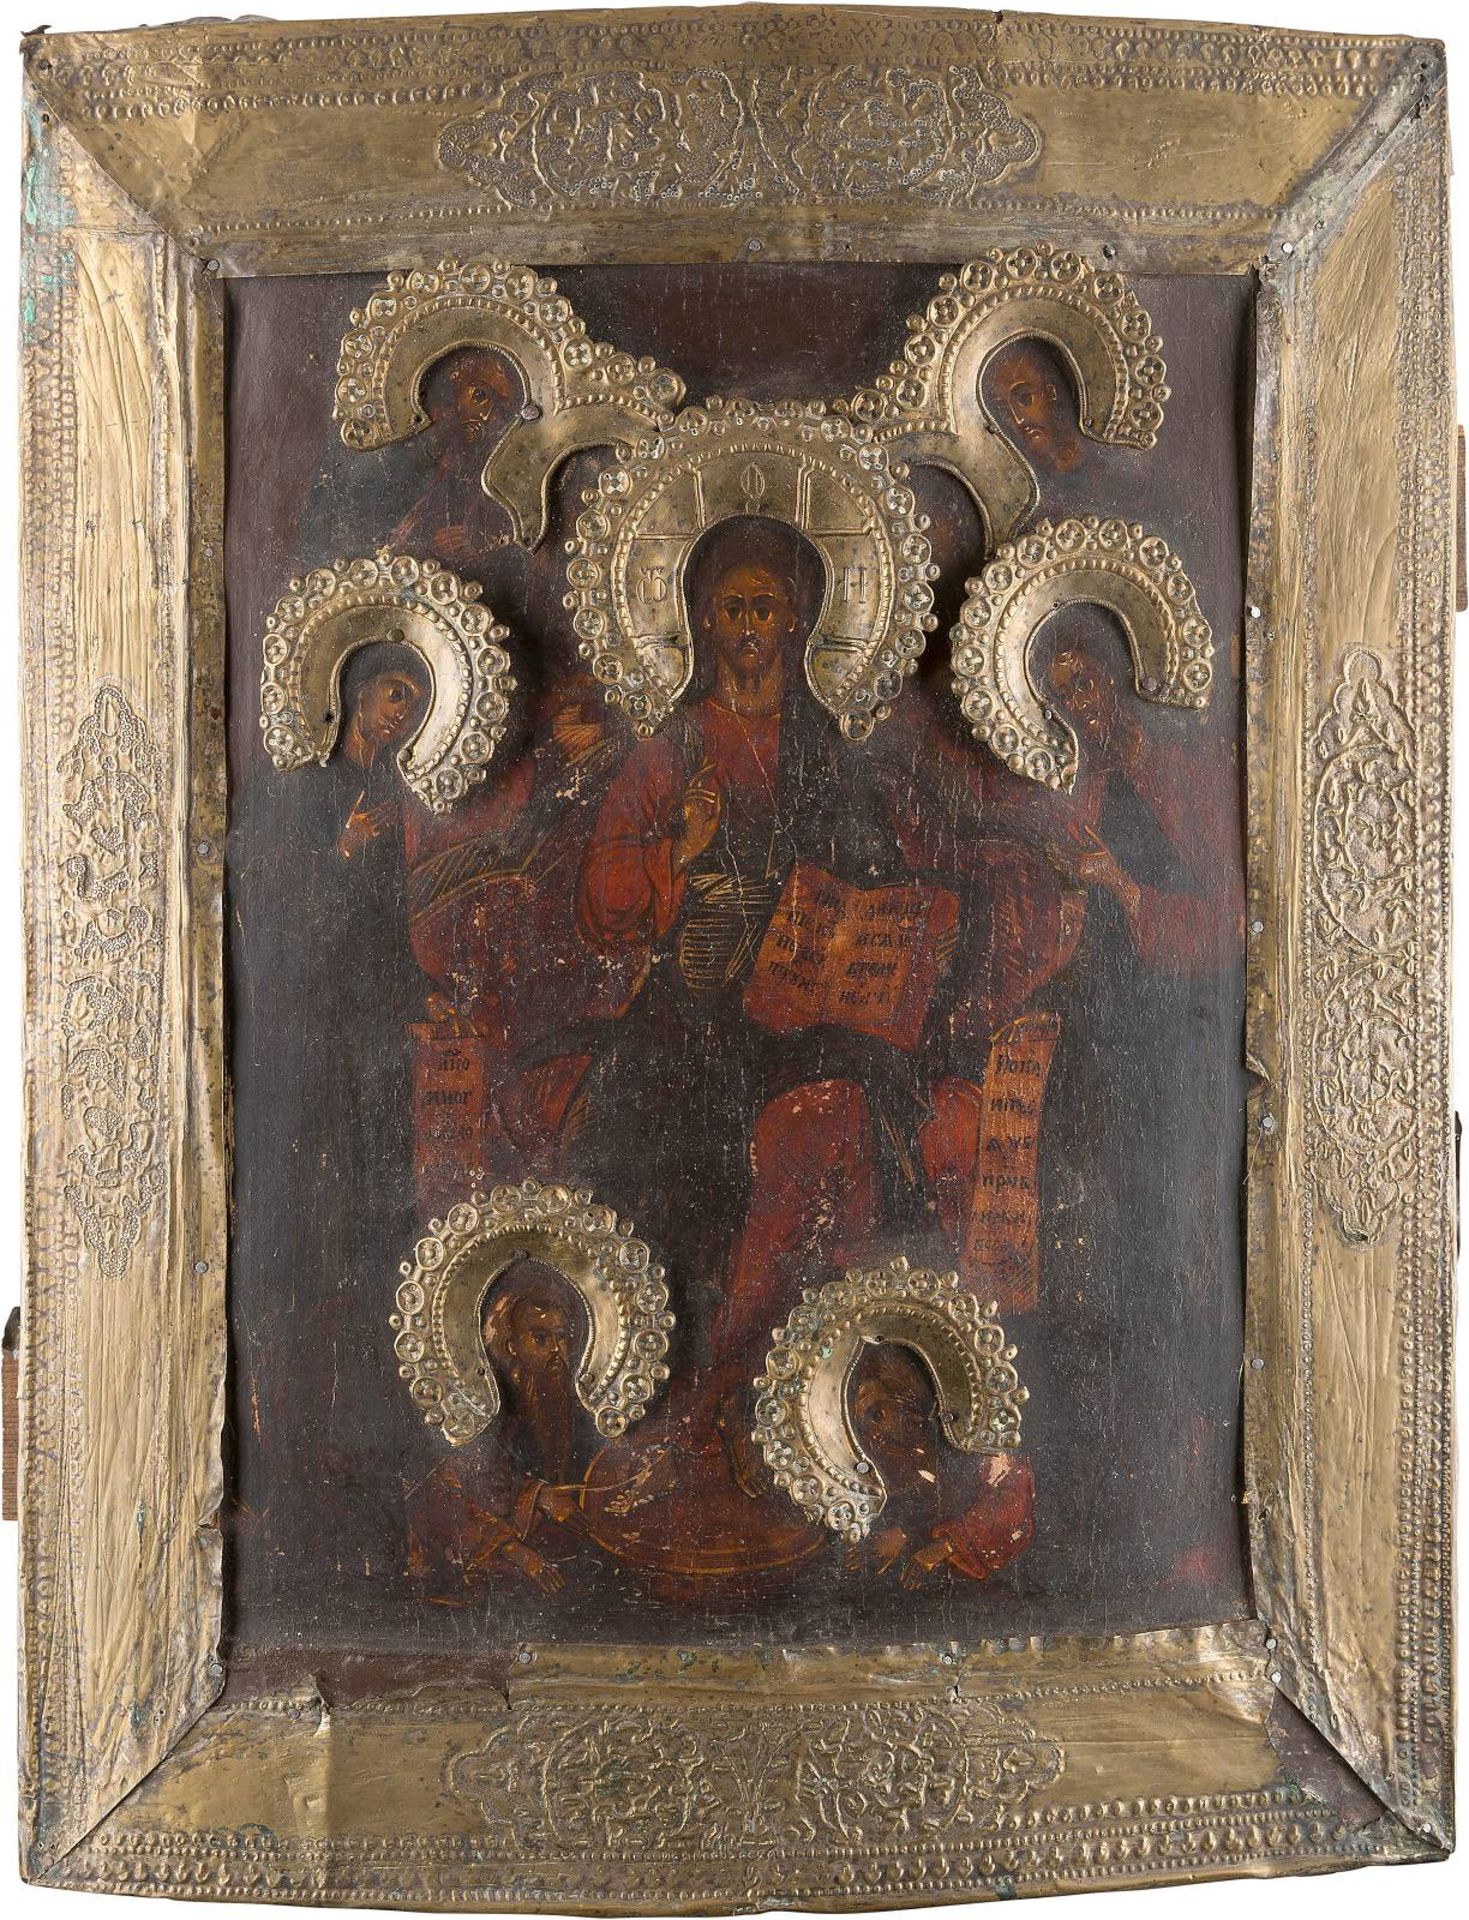 A LARGE ICON SHOWING AN EXTENDED DEISIS WITH BASMARussian, 19th century Tempera on wood panel.